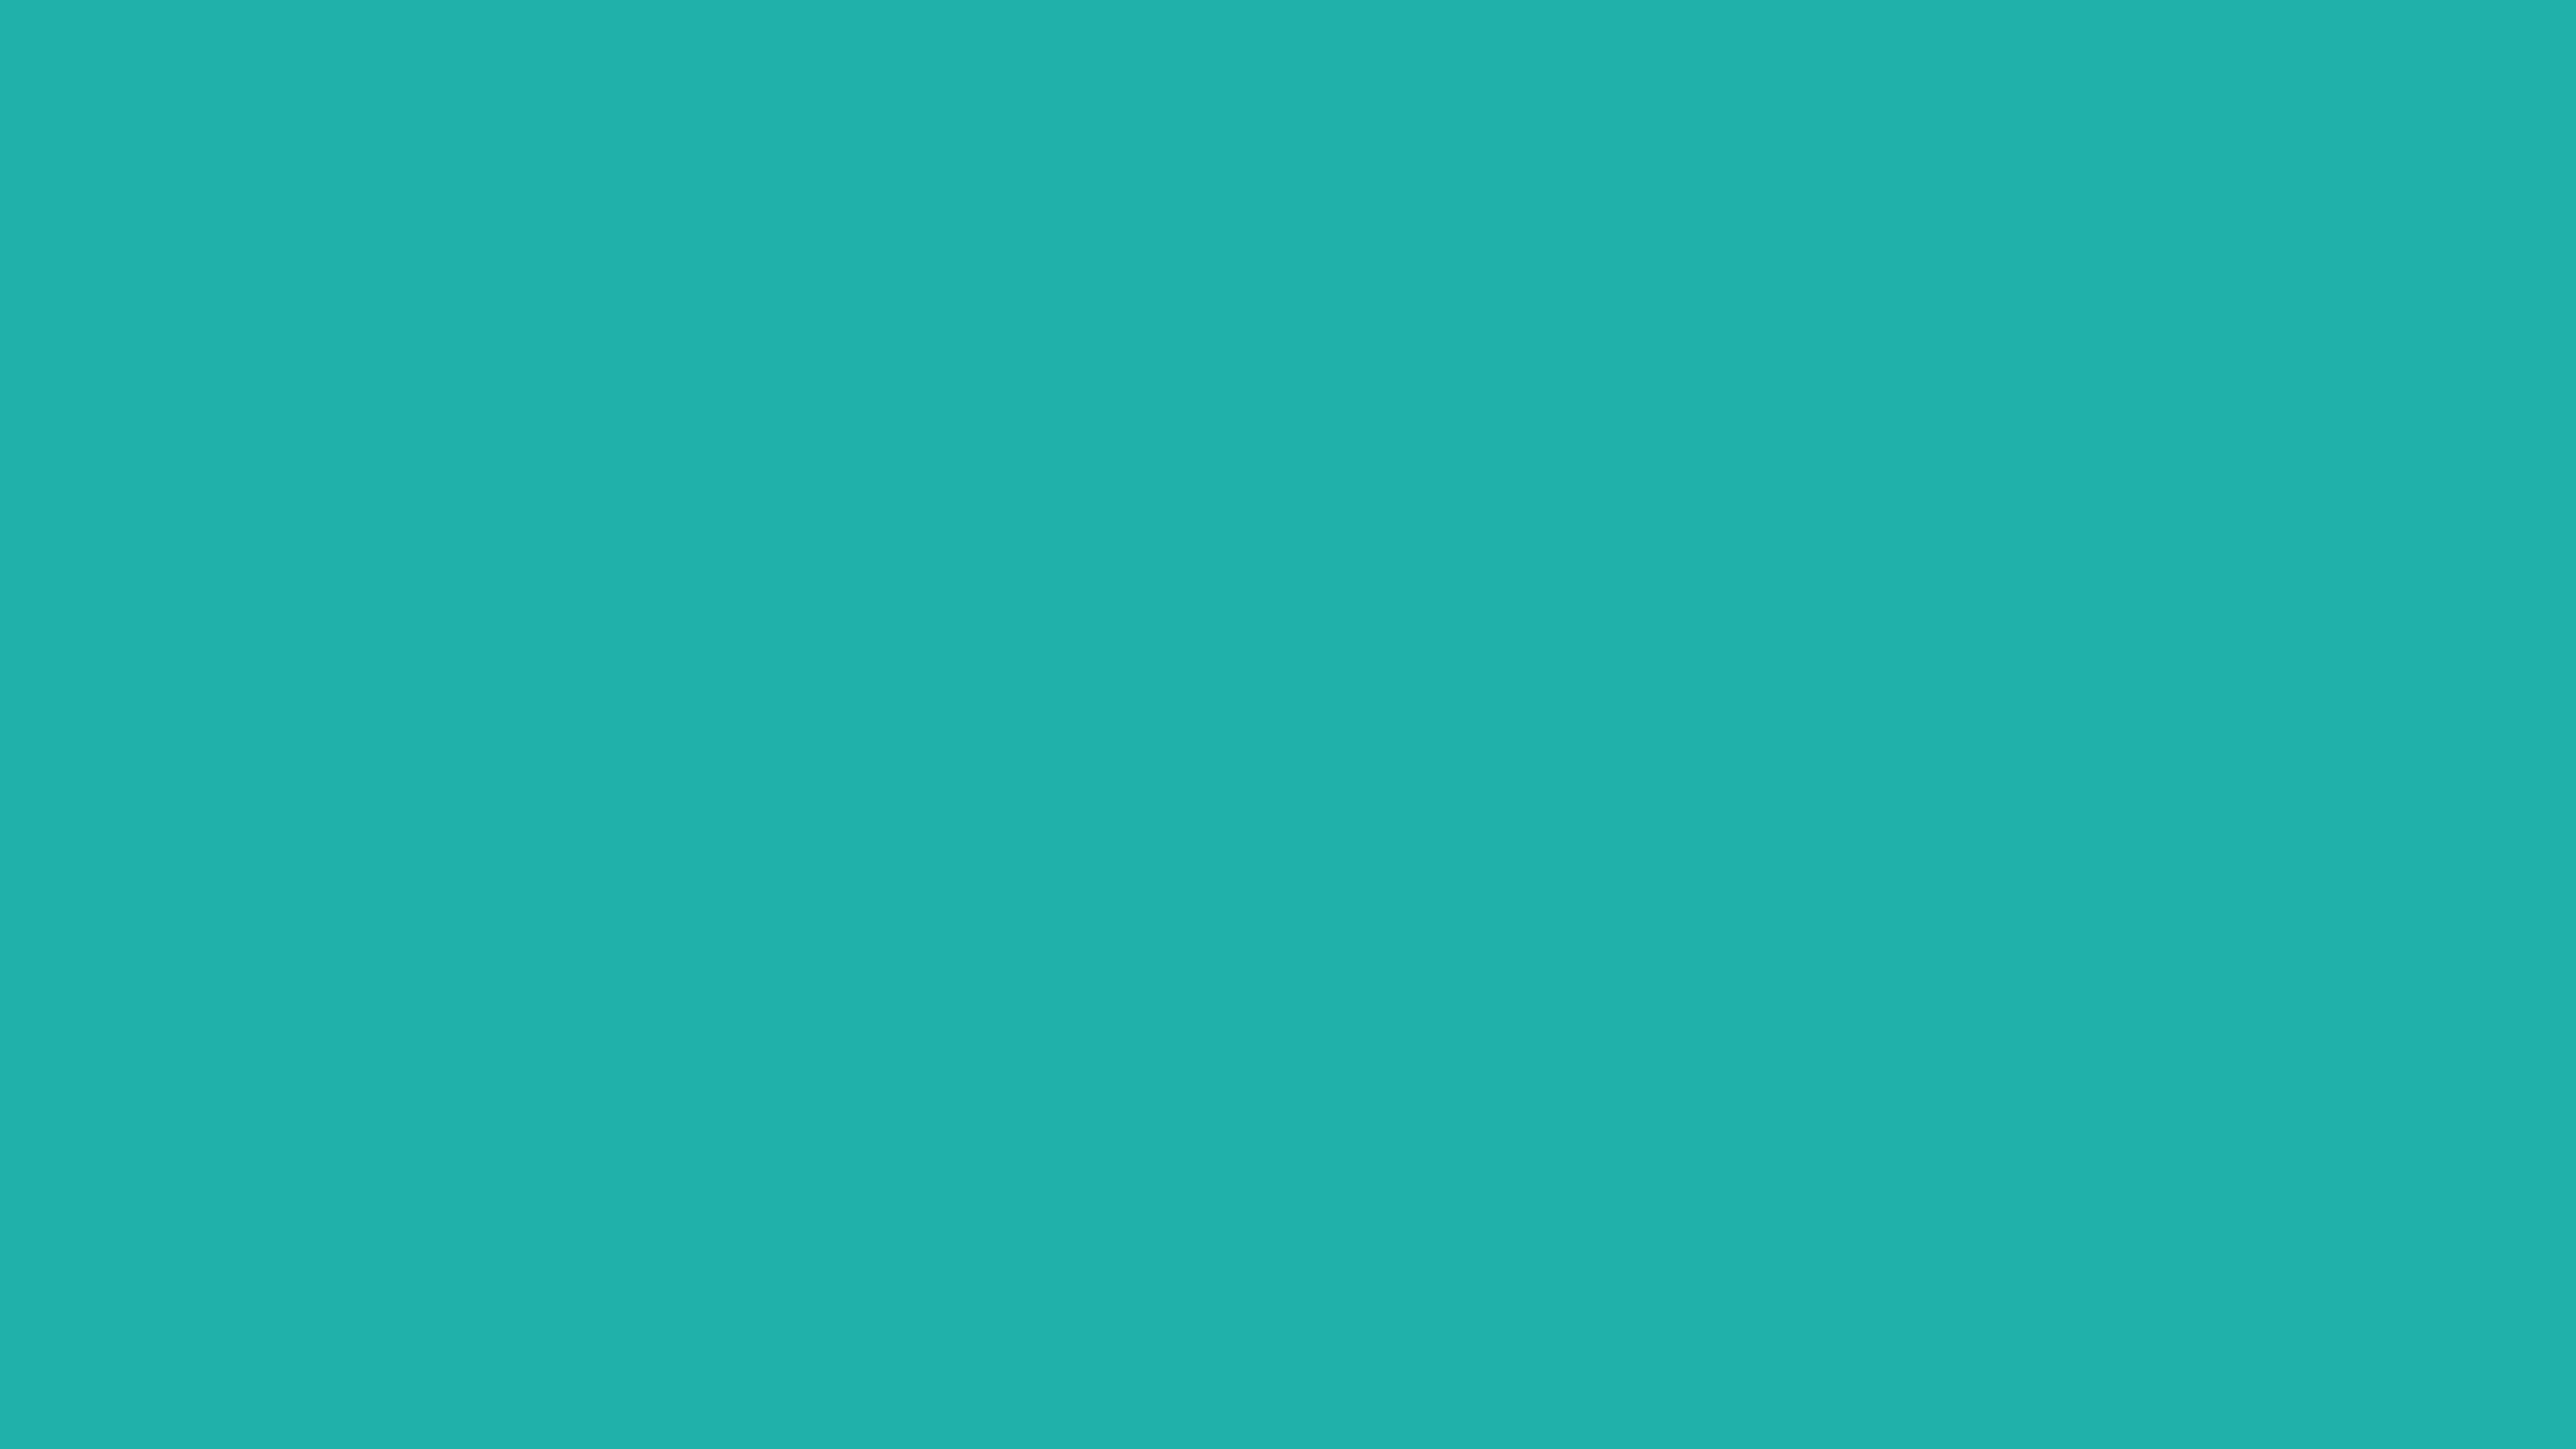 5120x2880 Light Sea Green Solid Color Background